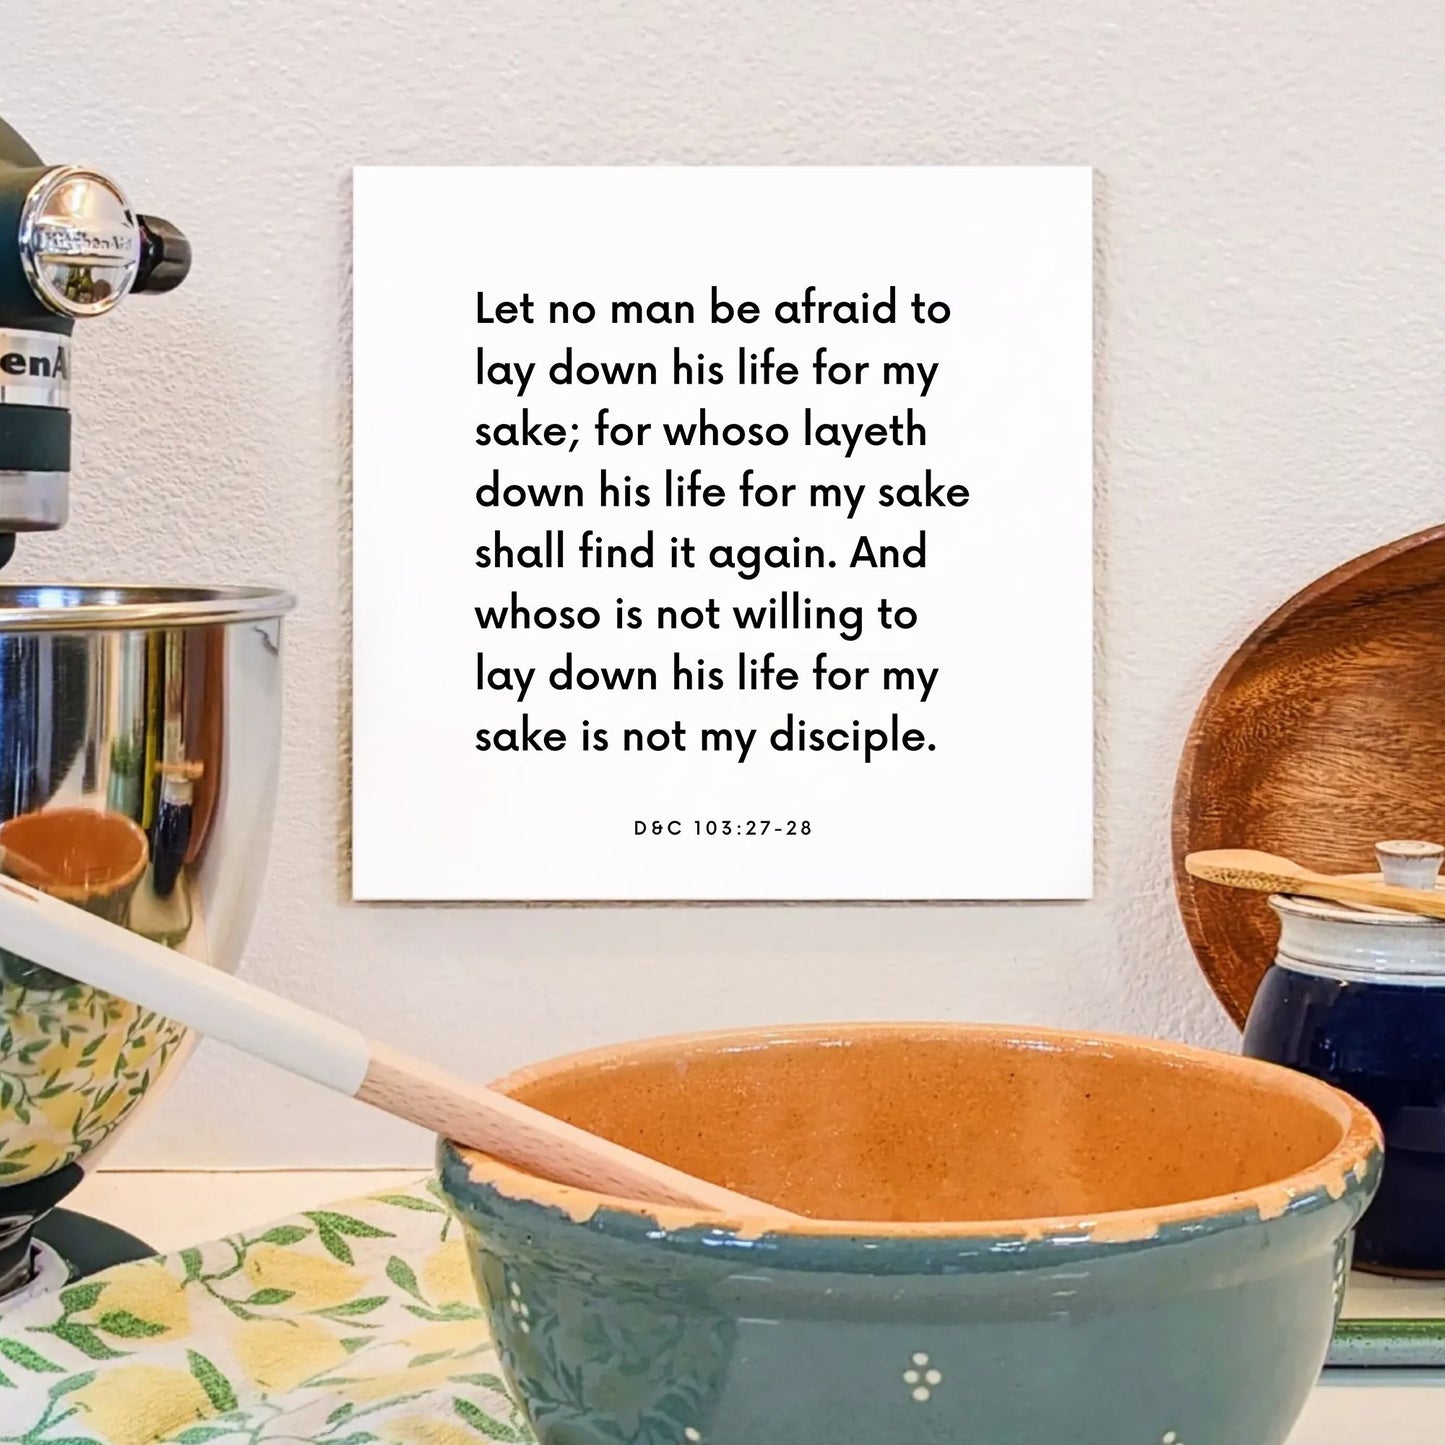 Kitchen mouting of the scripture tile for D&C 103:27-28 - "Whoso layeth down his life for my sake shall find it again"